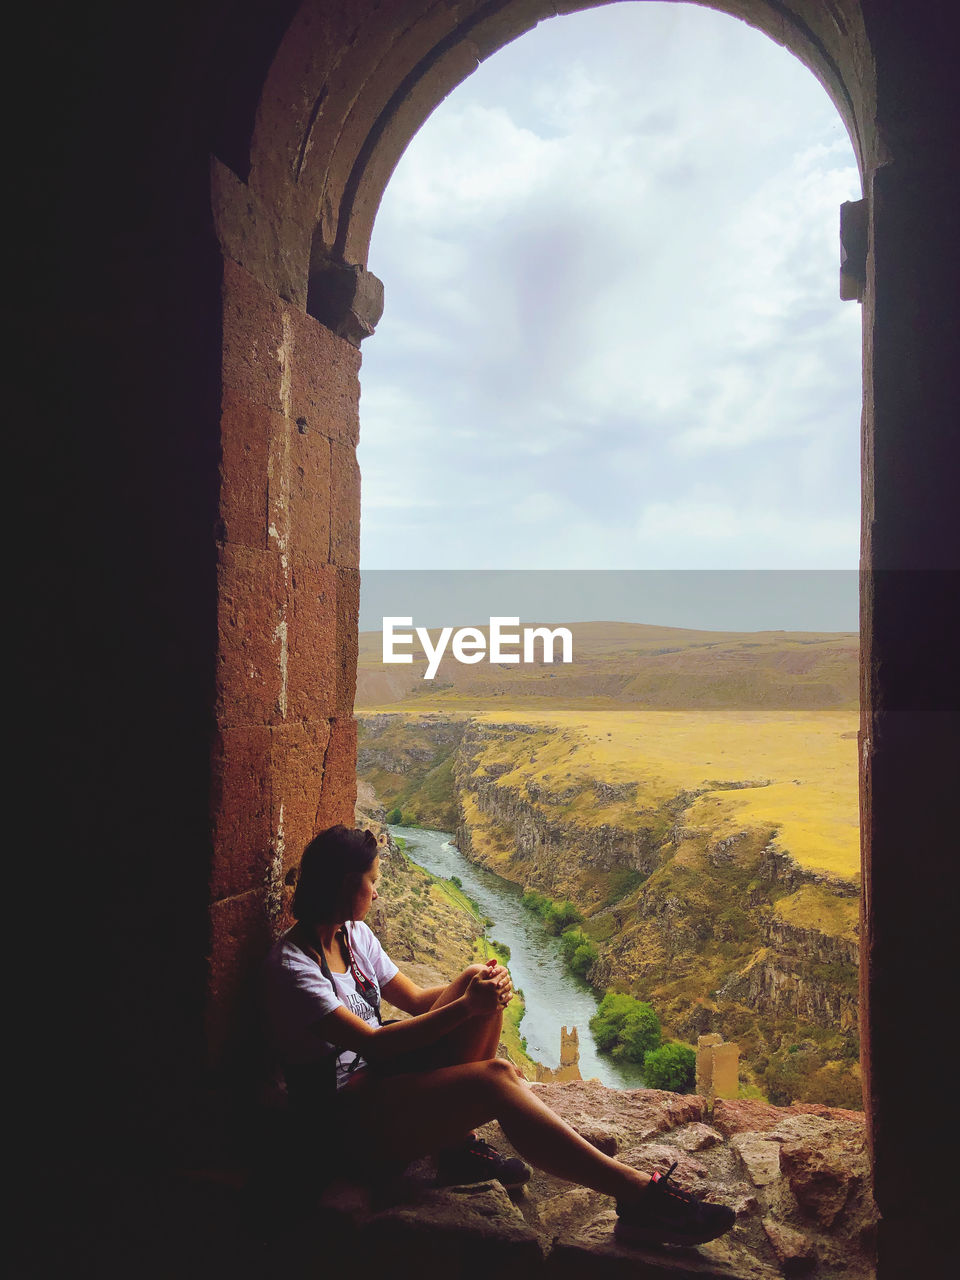 Woman sitting on arch window looking at mountains